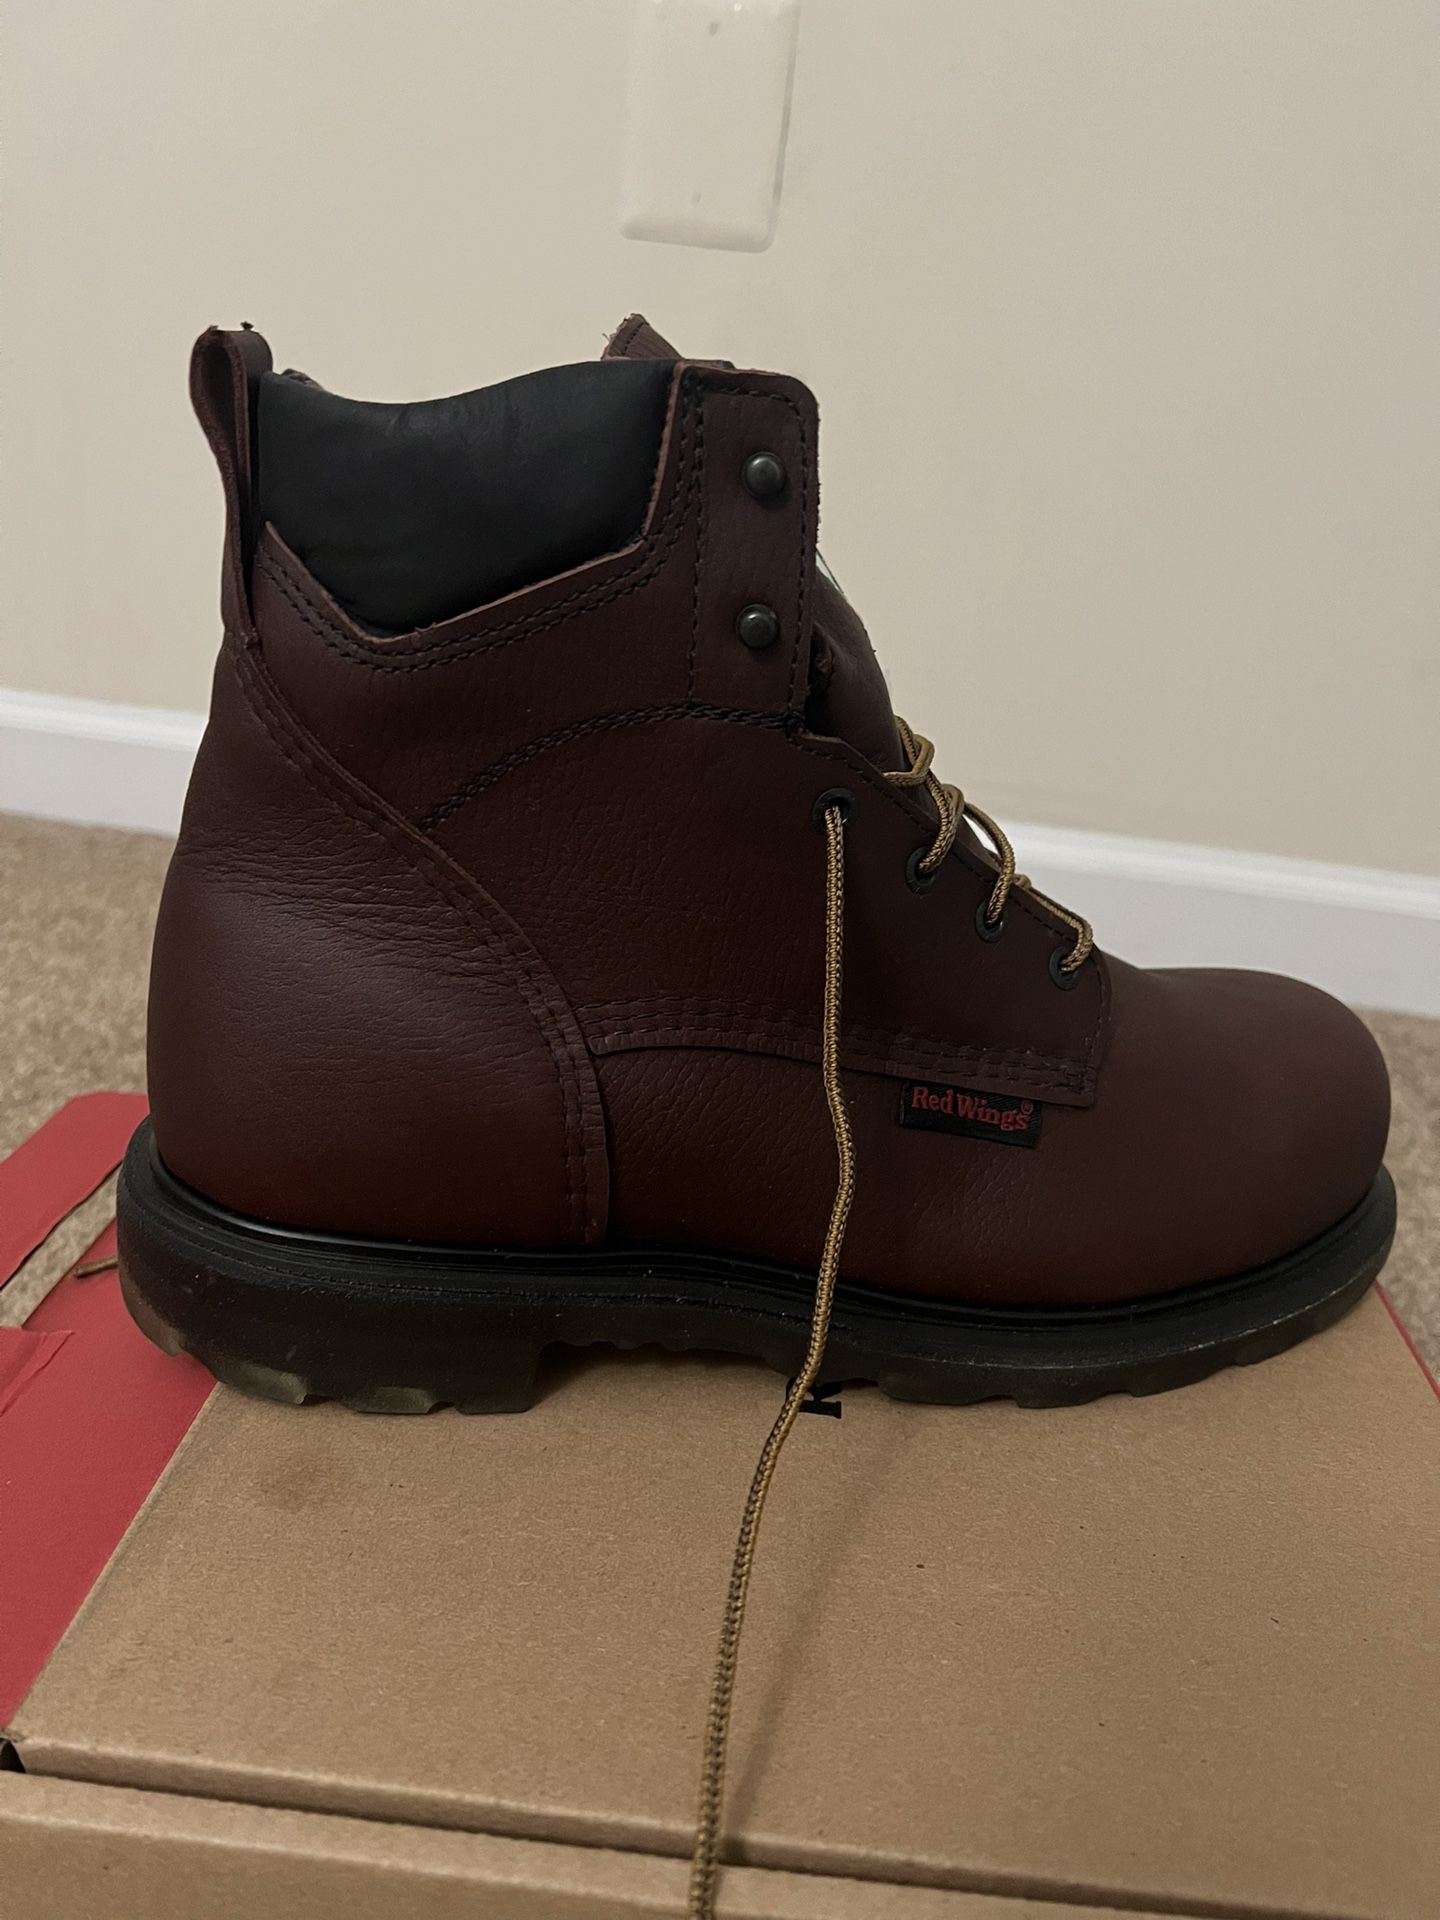 Red wing shoes